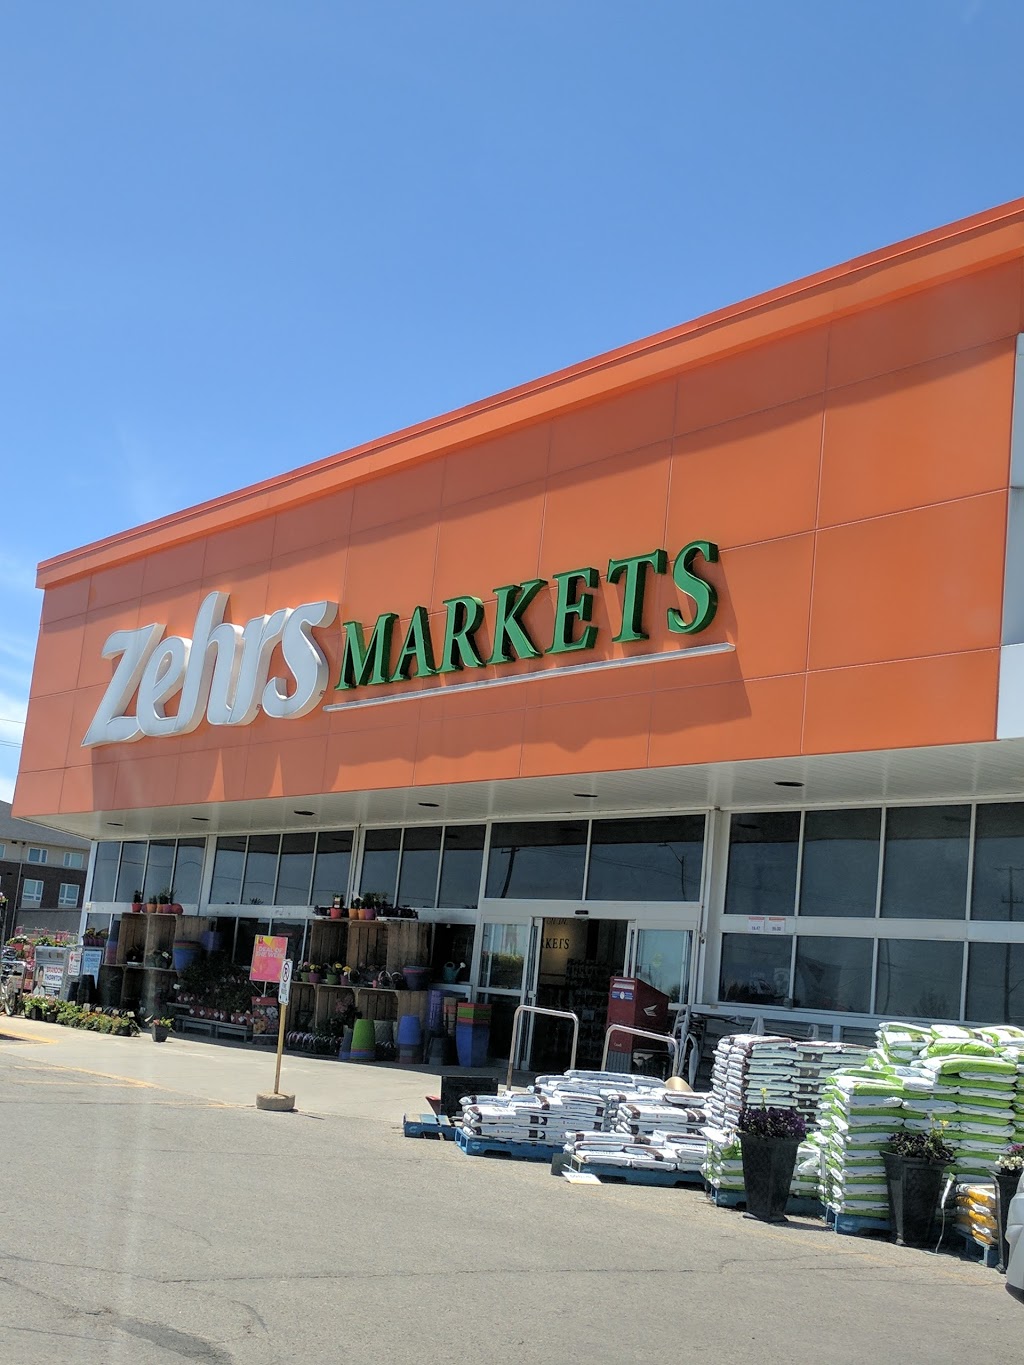 Zehrs | bakery | 800 Tower St S, Fergus, ON N1M 2R3, Canada | 5198435500 OR +1 519-843-5500